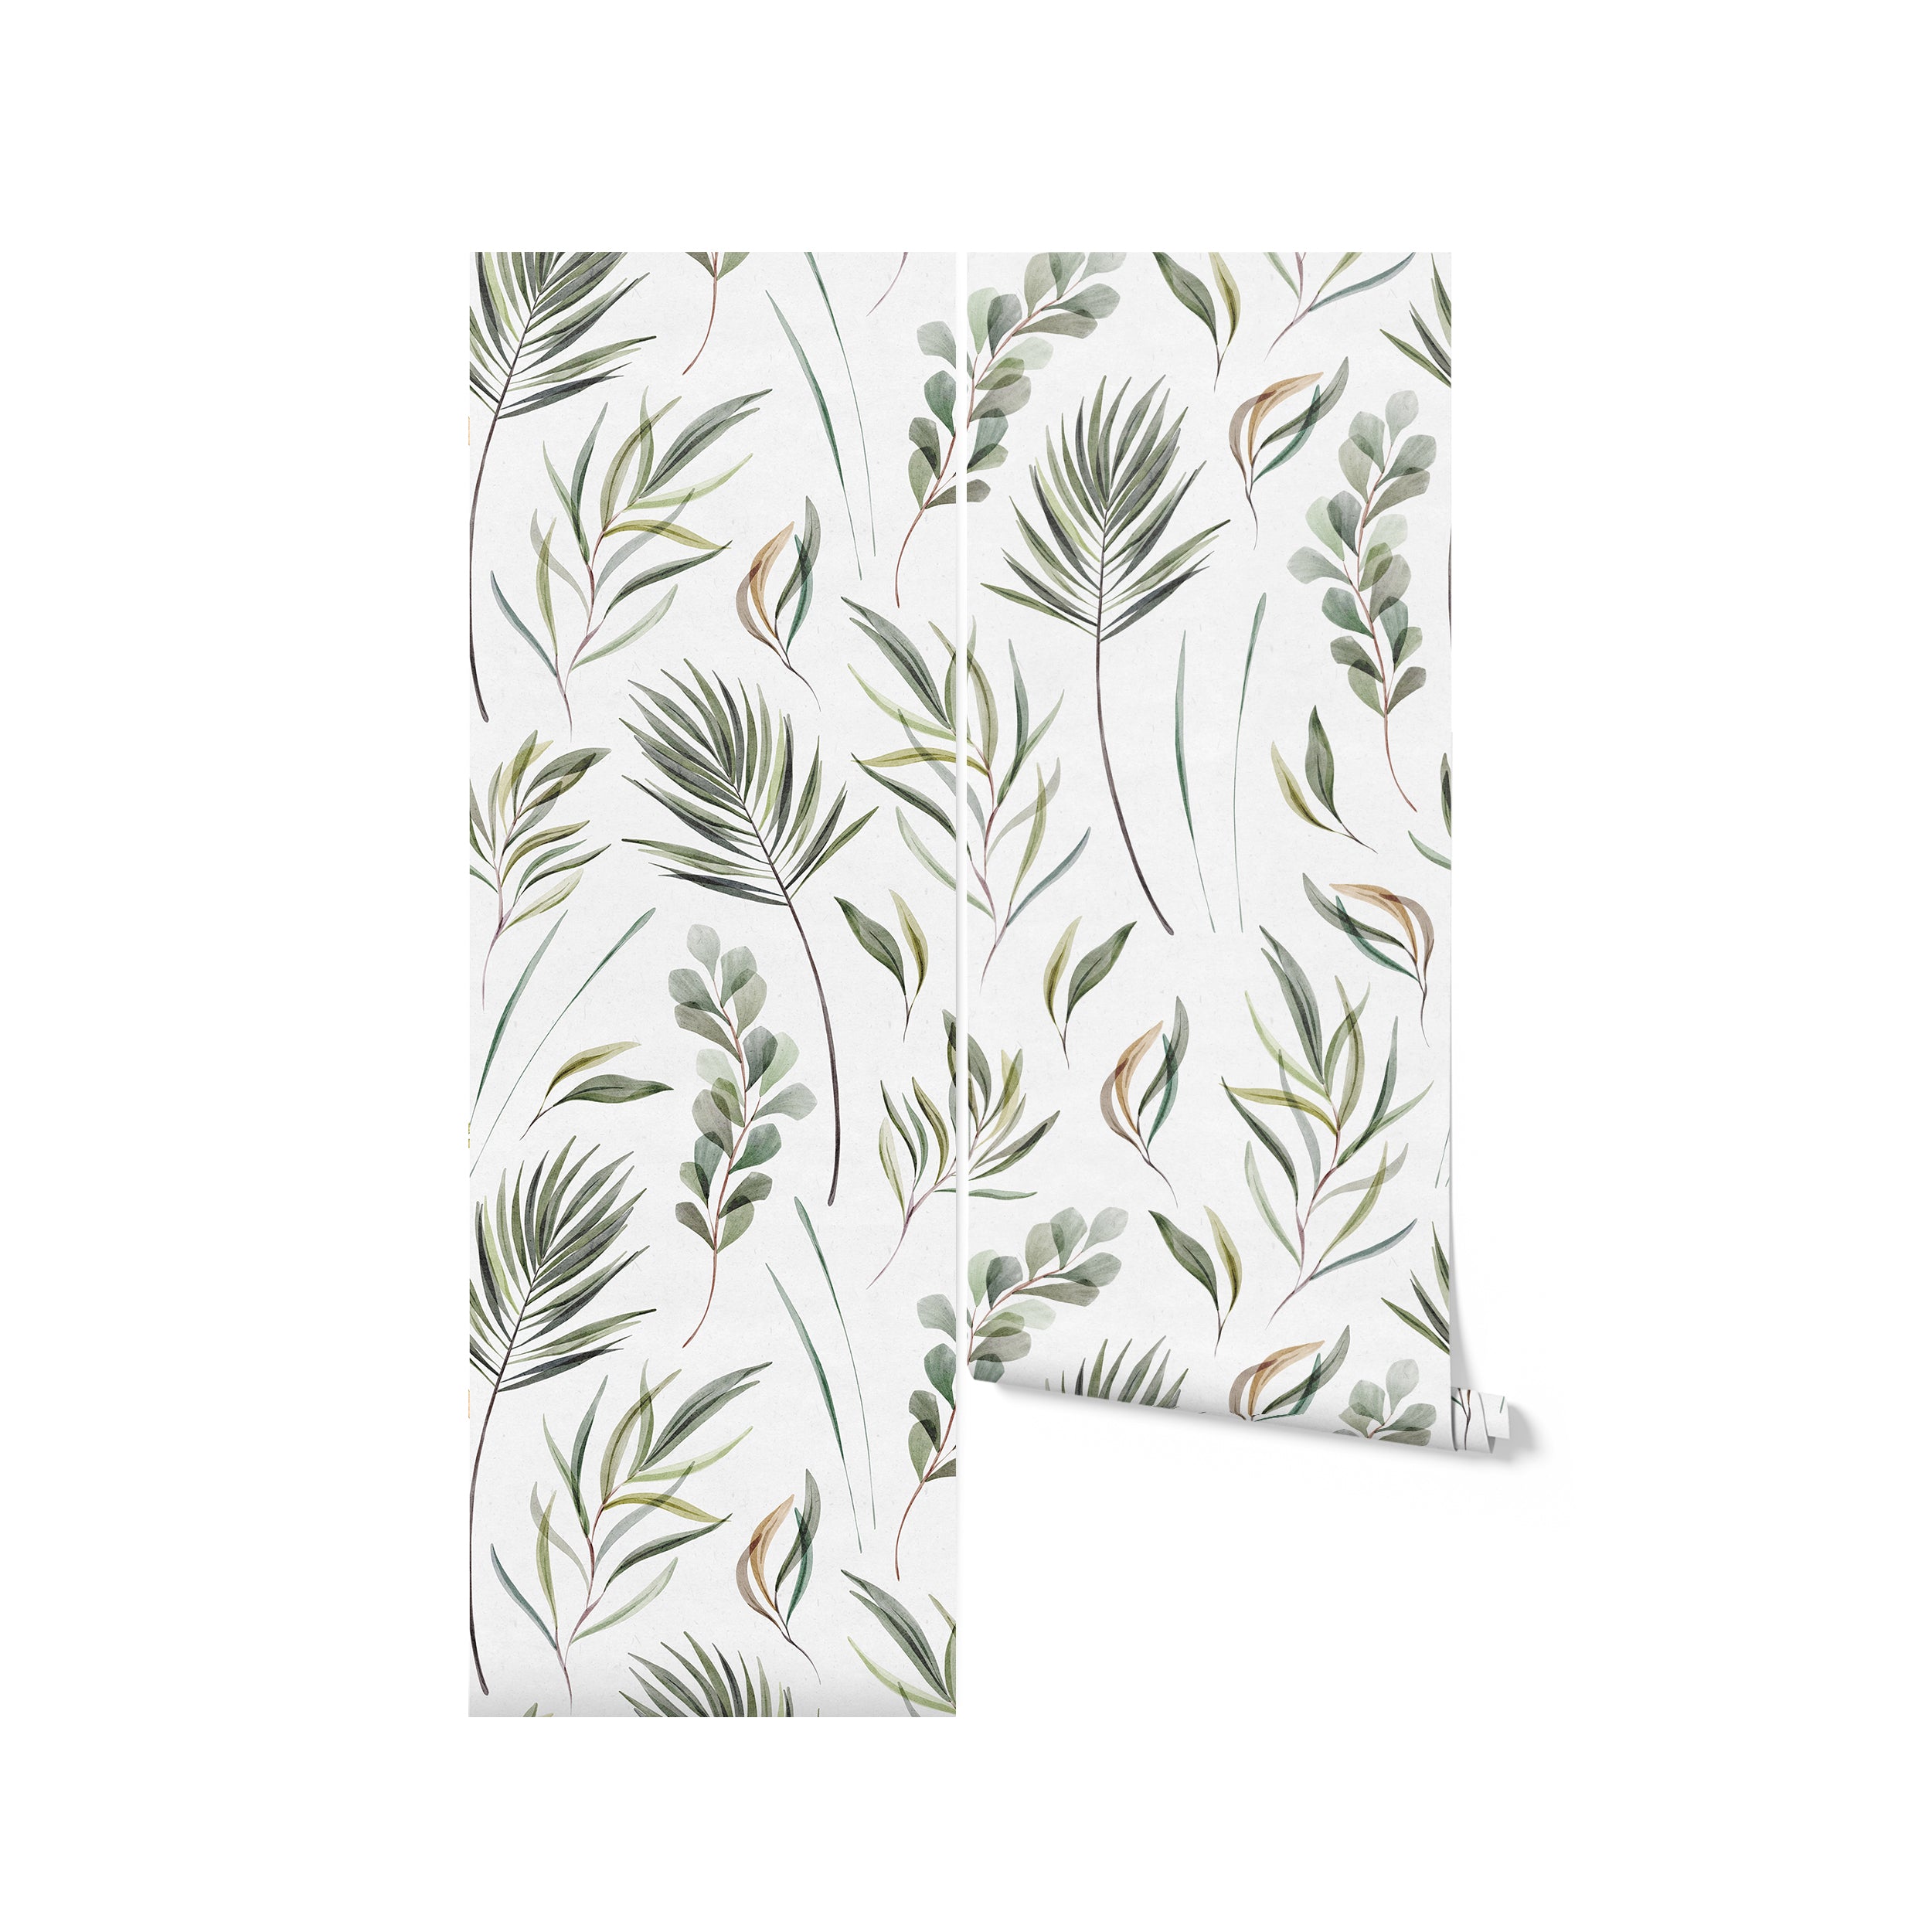 The Green Floral Wallpaper shown in a rolled format, providing a glimpse of how the pattern repeats across the length of the paper, with its elegant watercolor greenery design that promises to bring a peaceful and fresh look to interiors.